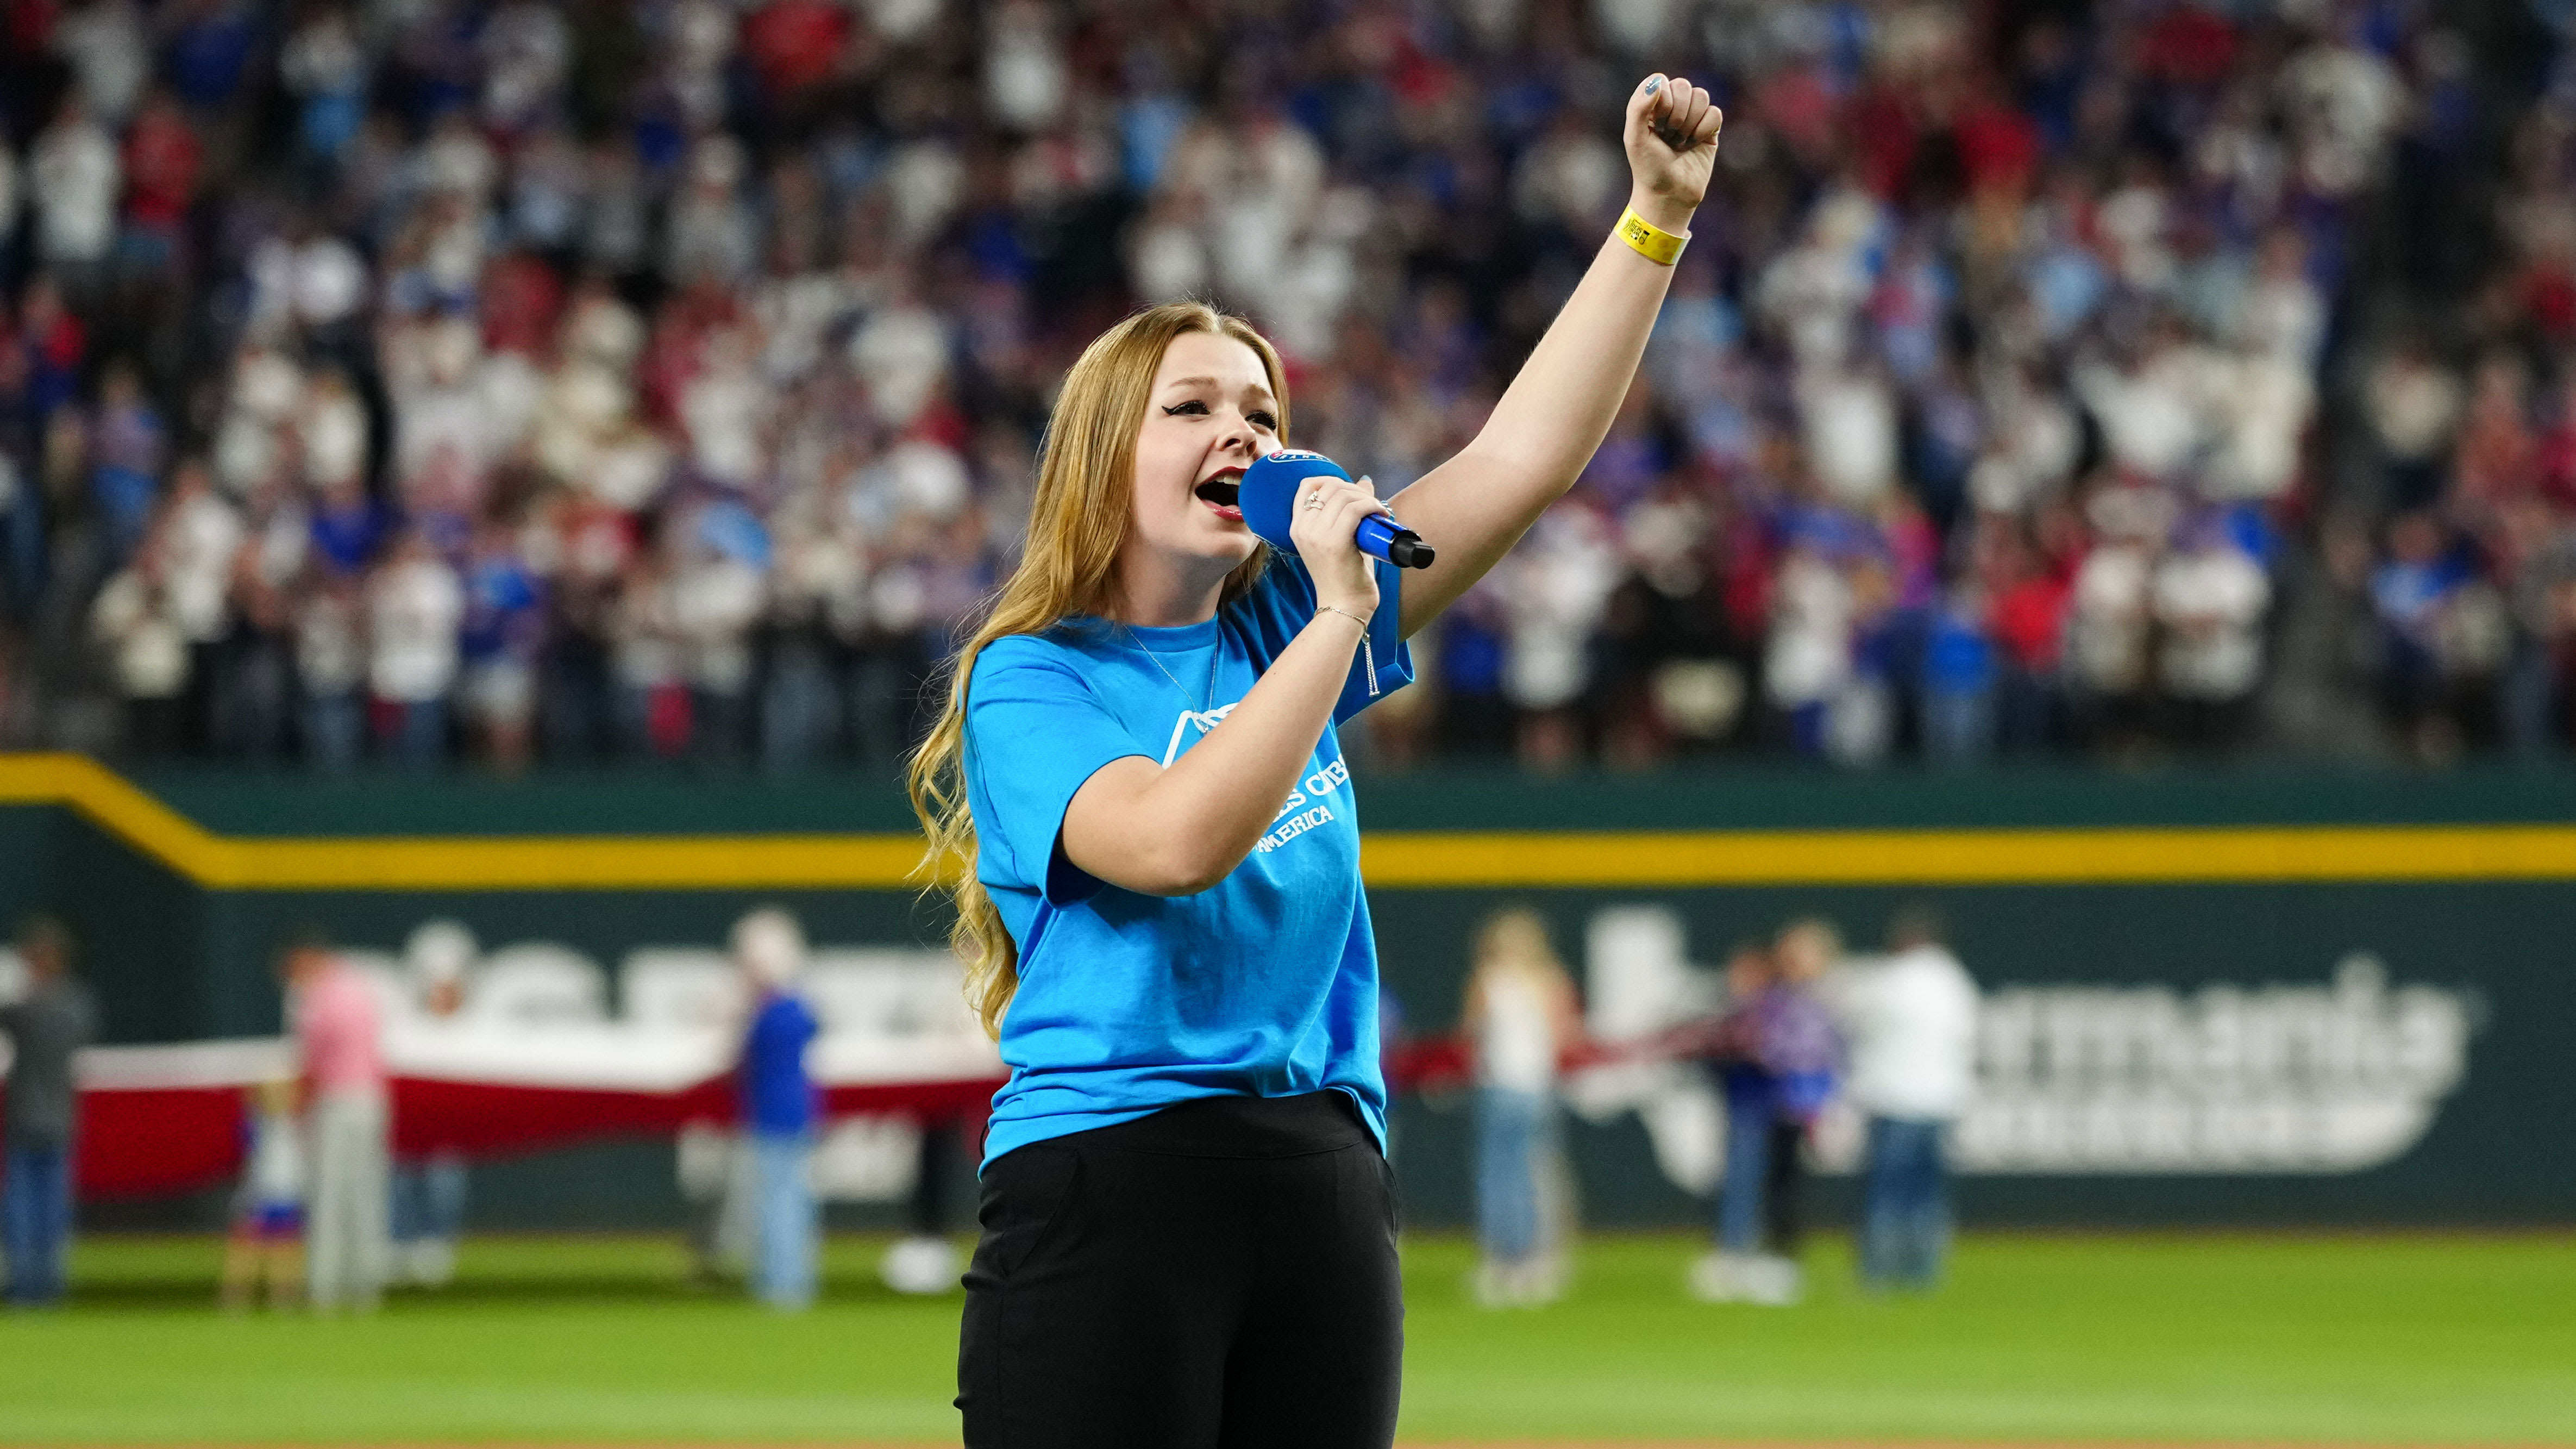 Pearle Peterson sings the national anthem